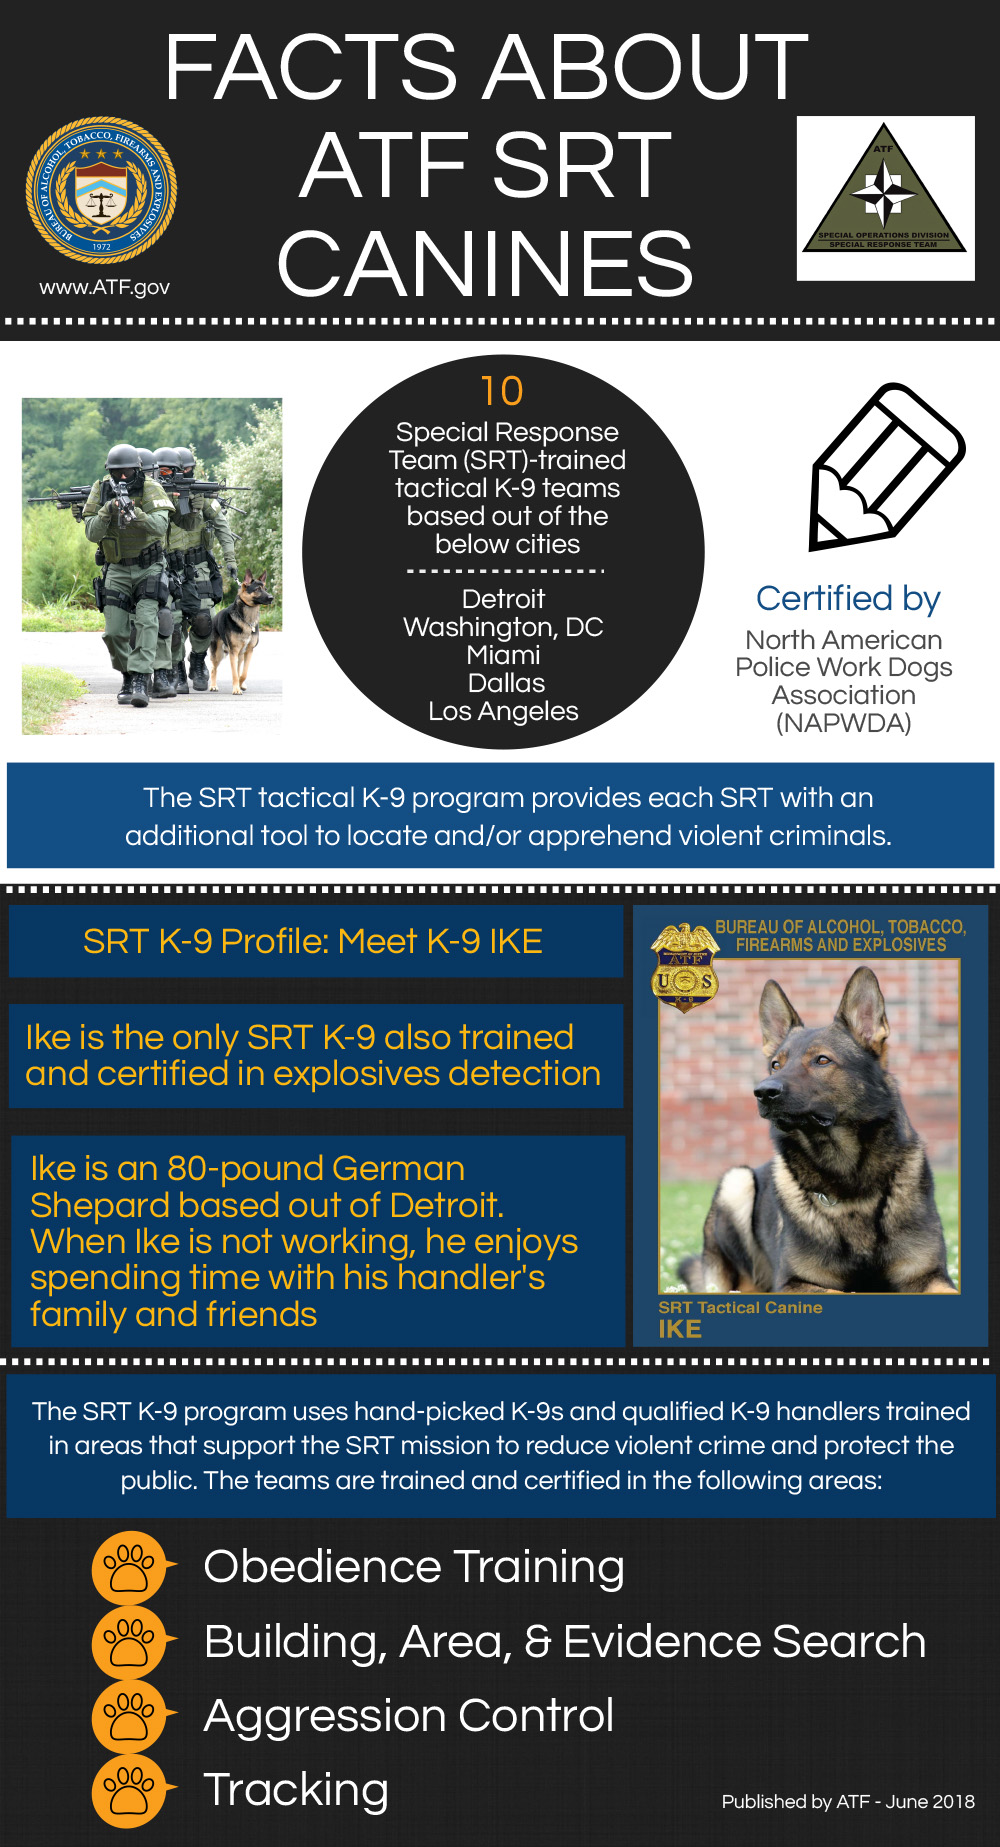 Facts About ATF Special Response Team (SRT) Canines